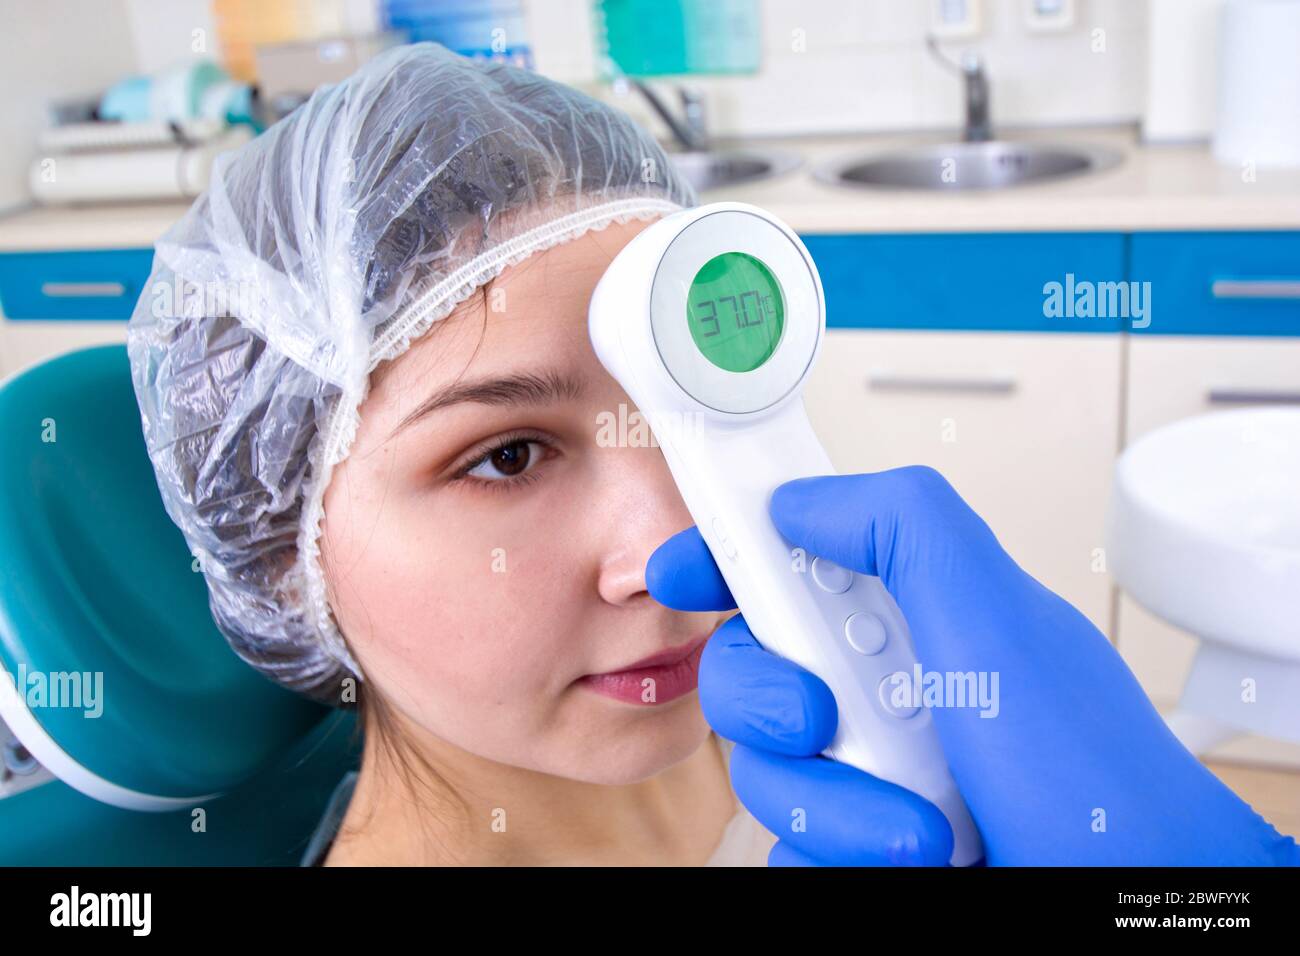 Doctor in protective suit uniform checking temperature of young female patient. Coronavirus outbreak. Covid-19 concept. Stock Photo